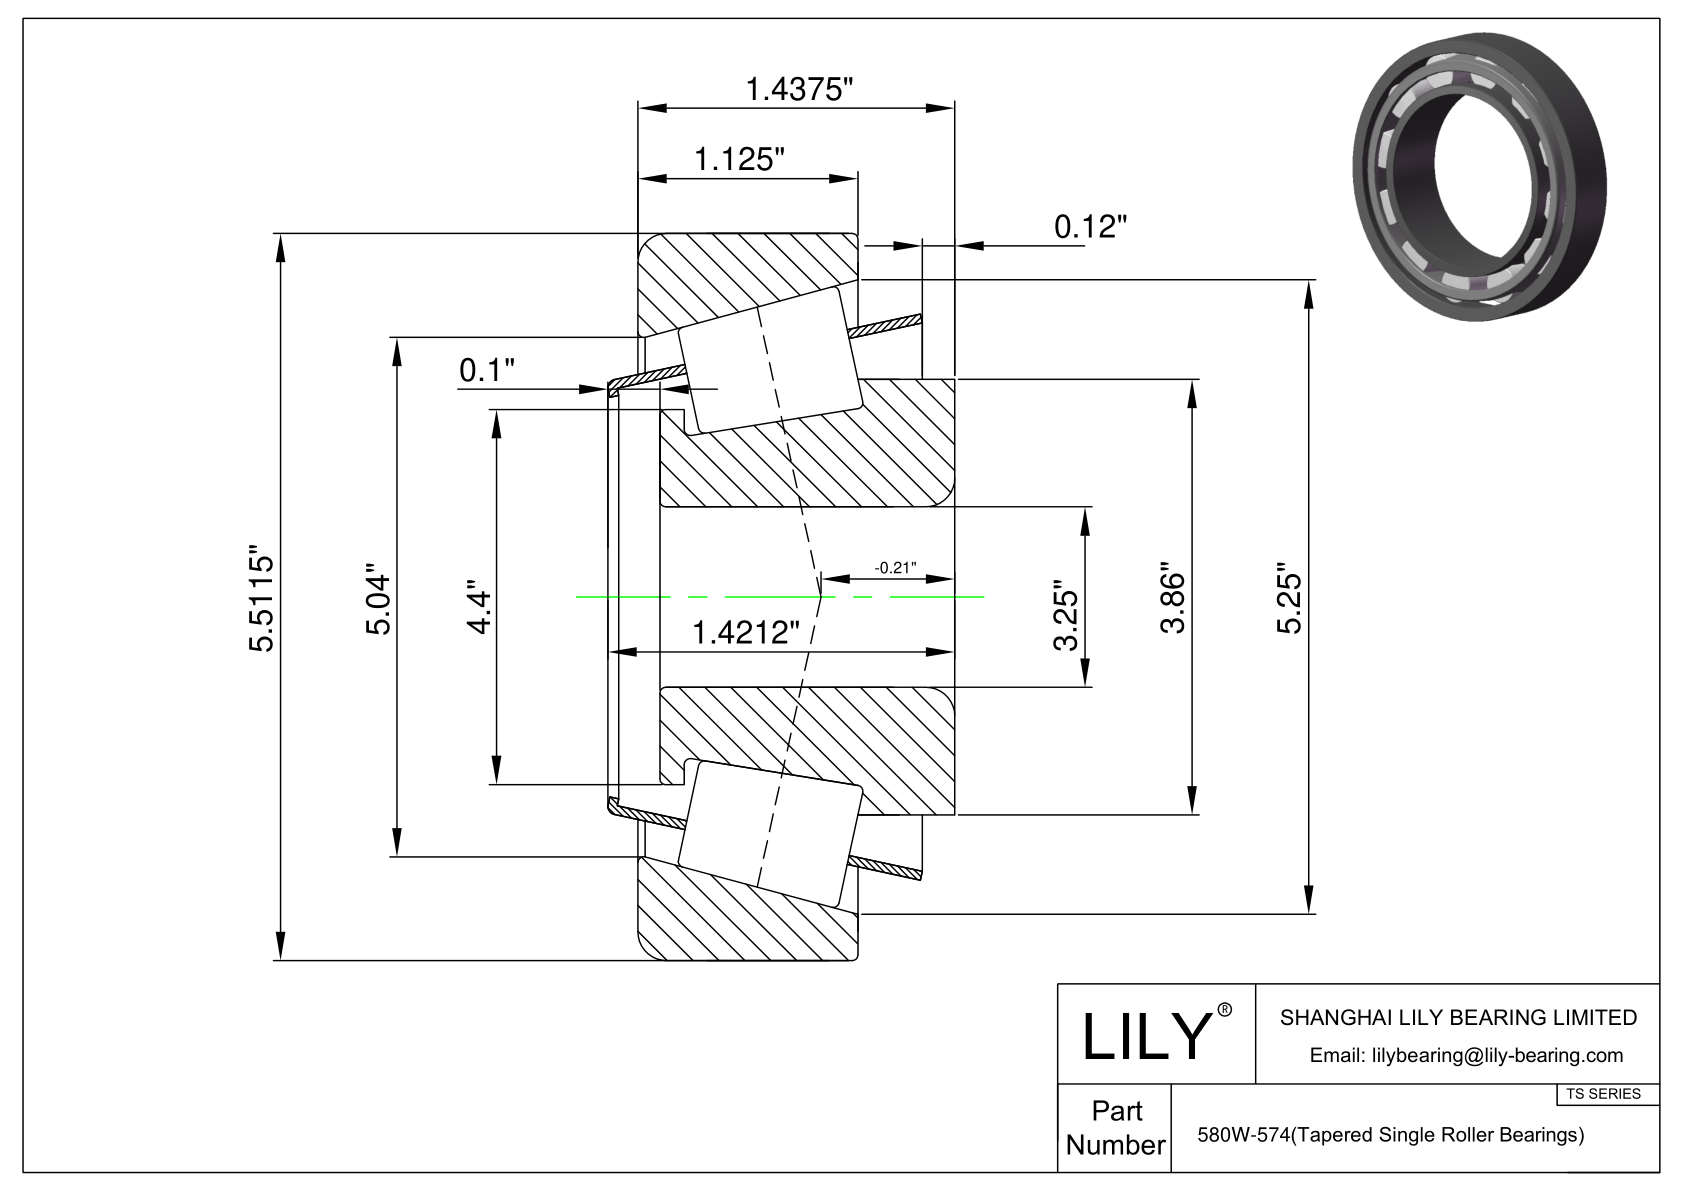 580W-574 TS (Tapered Single Roller Bearings) (Imperial) cad drawing